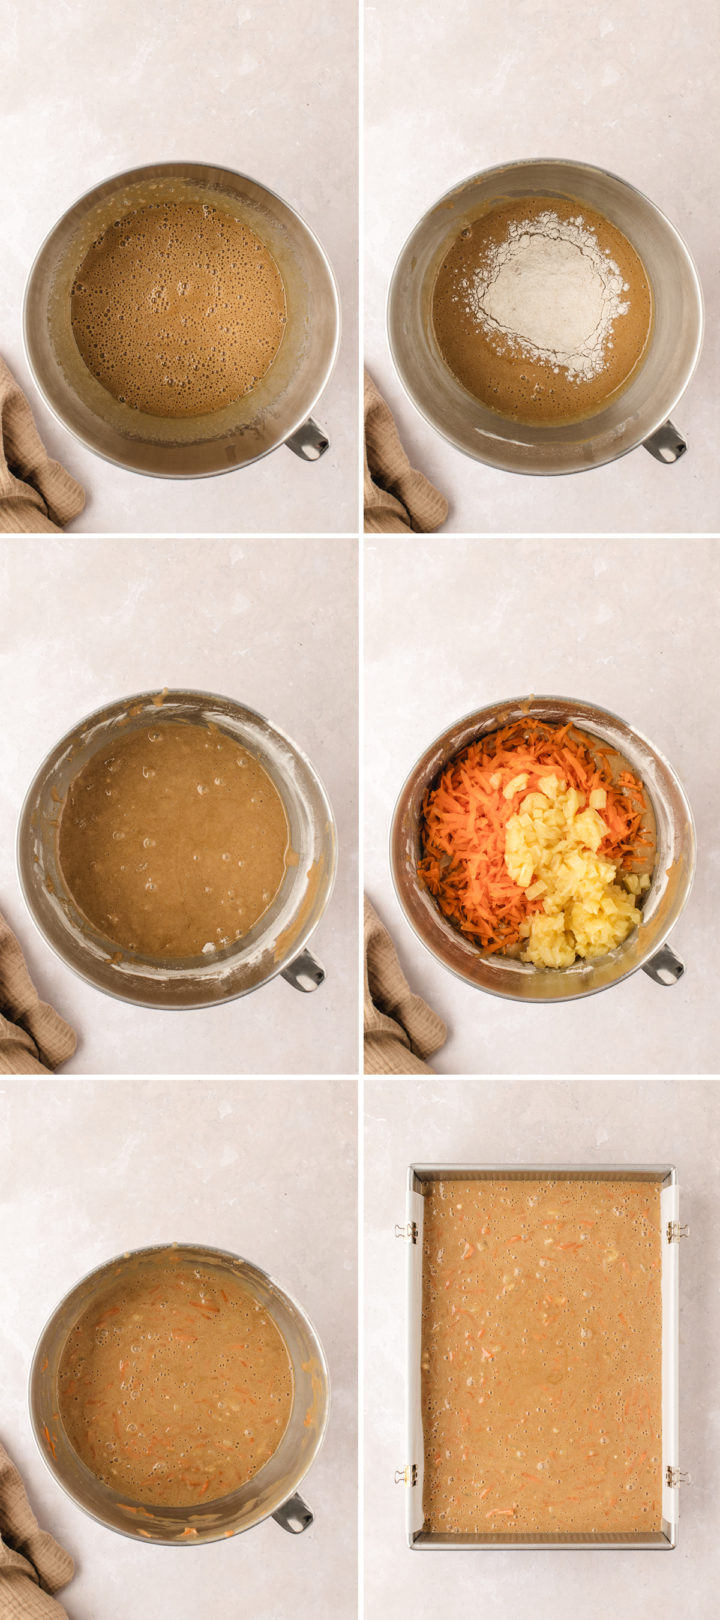 step by step photos showing how to make the batter for a pineapple carrot cake